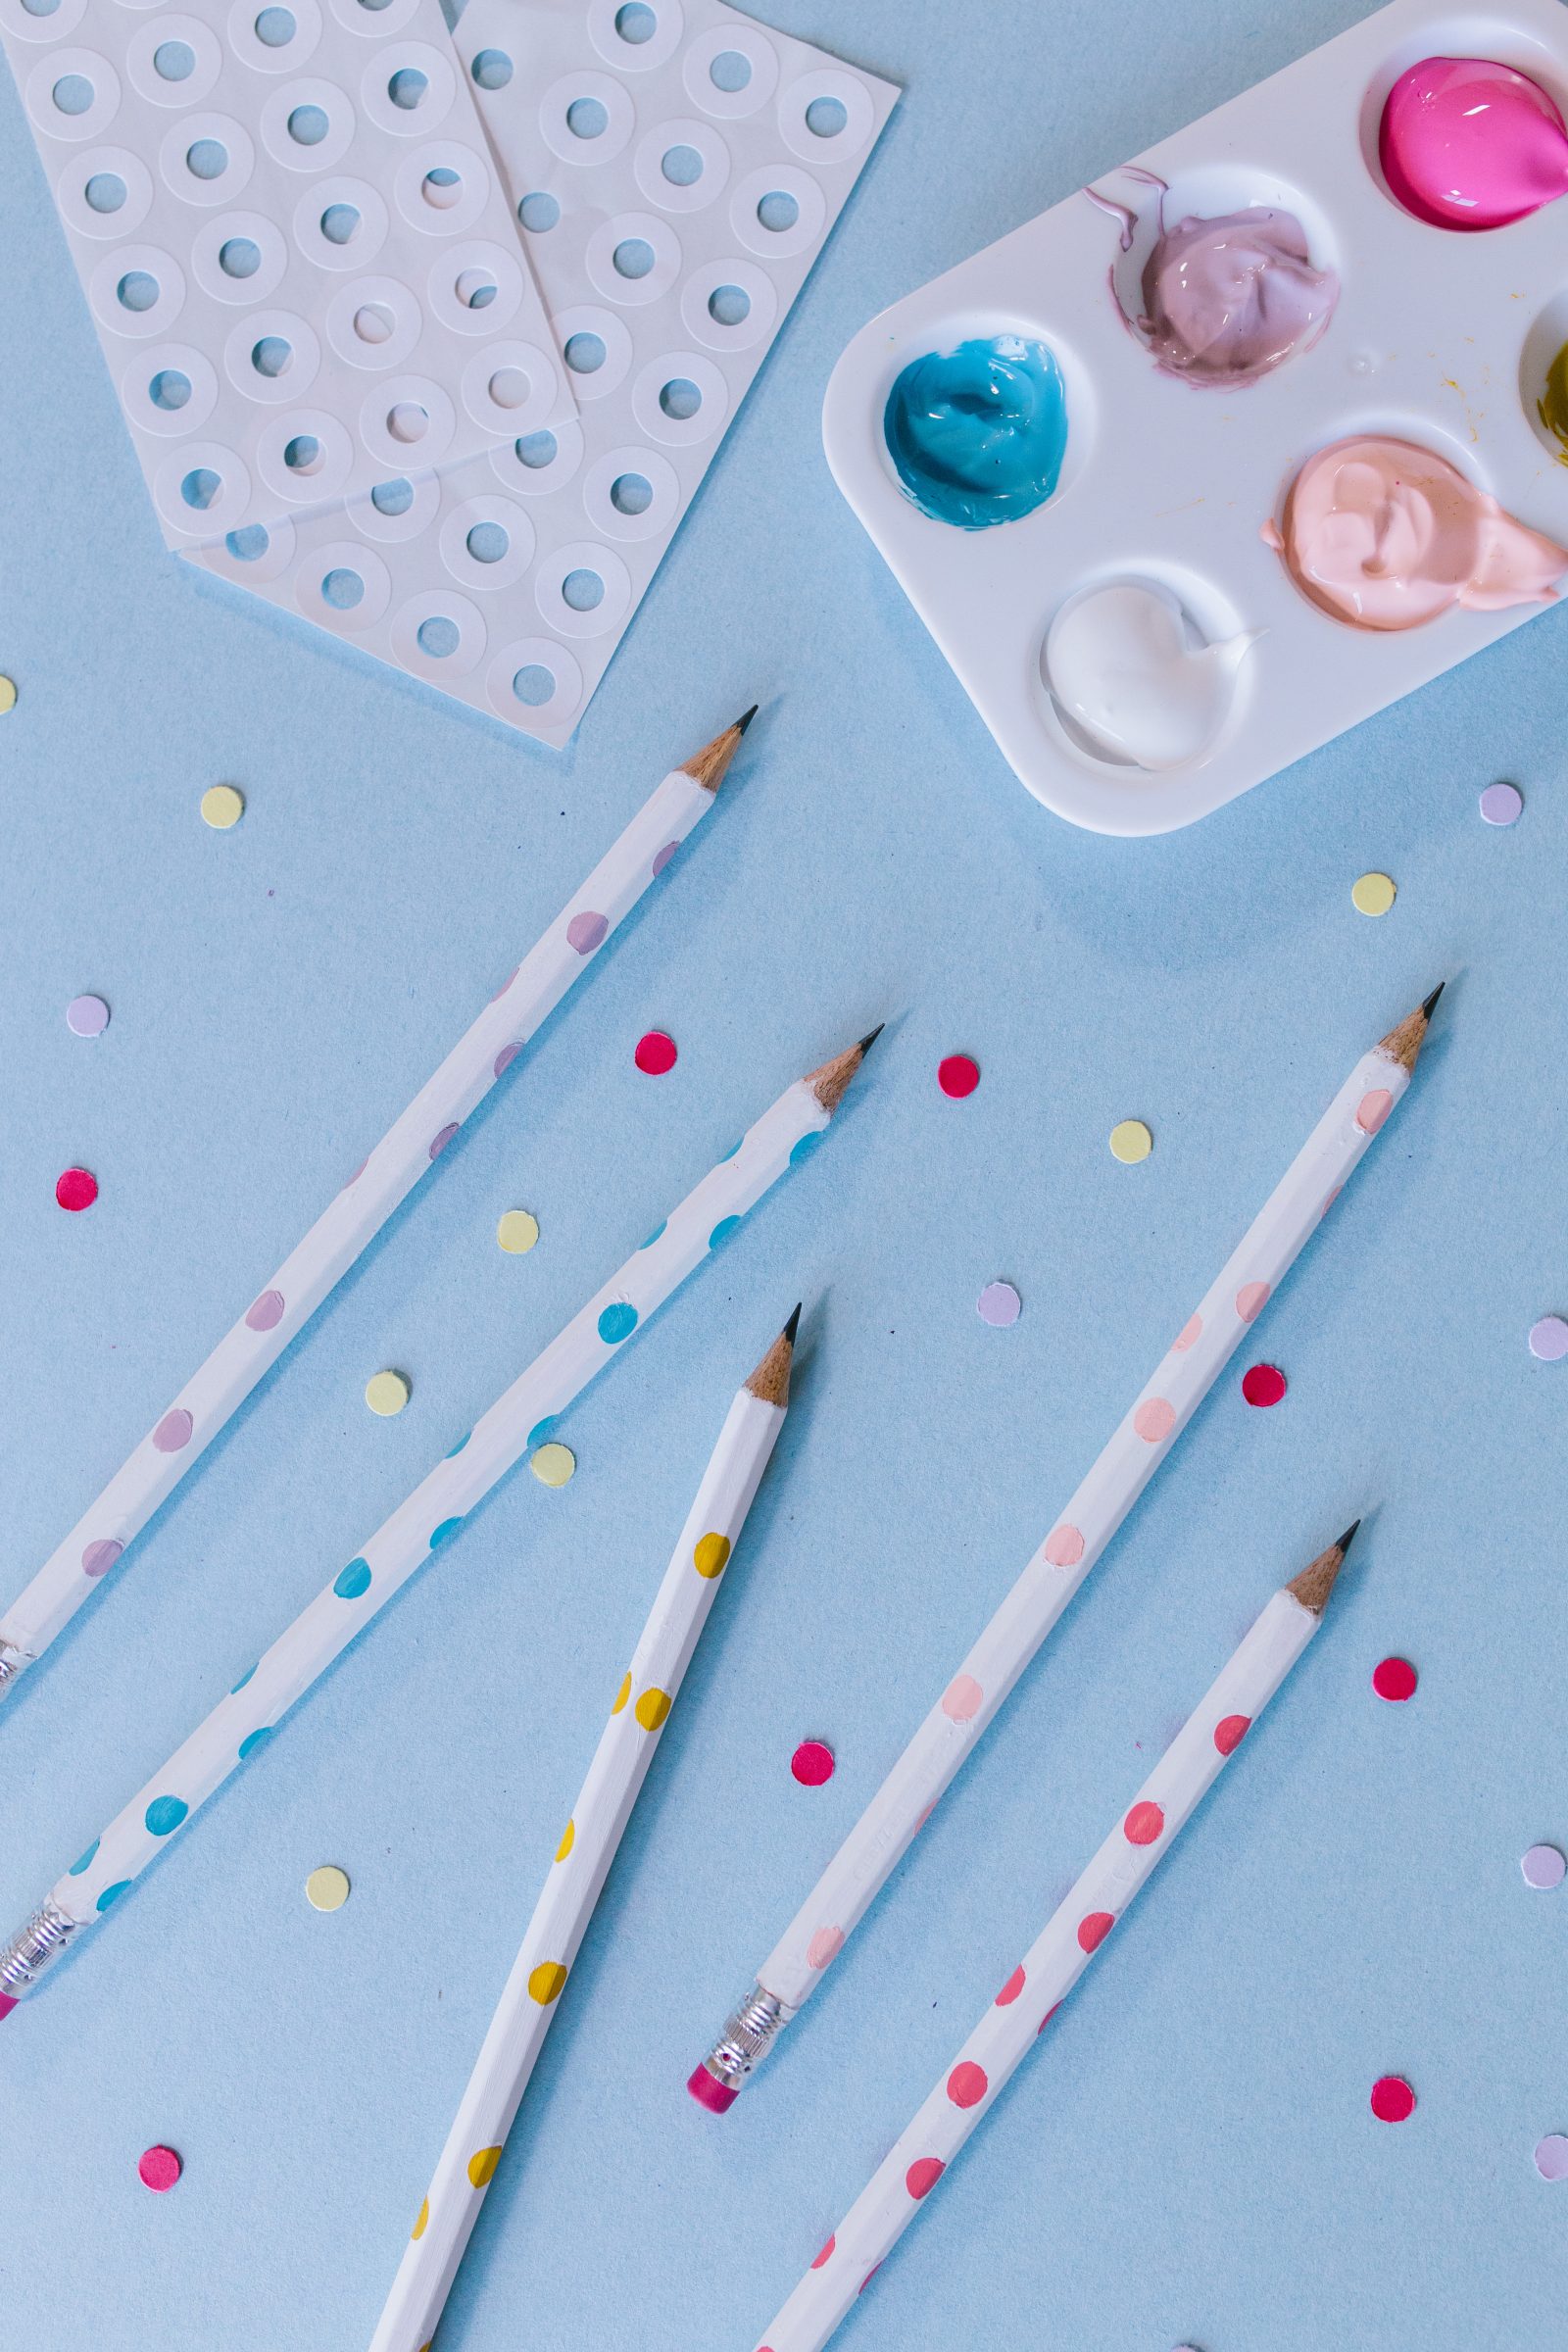 Back to School Crafts: How to Make Embellished Pencils 3 Ways + a tutorial featured by Top US Craft Blog + The Pretty Life Girls + Color Blocked Washi Embellished Pencils